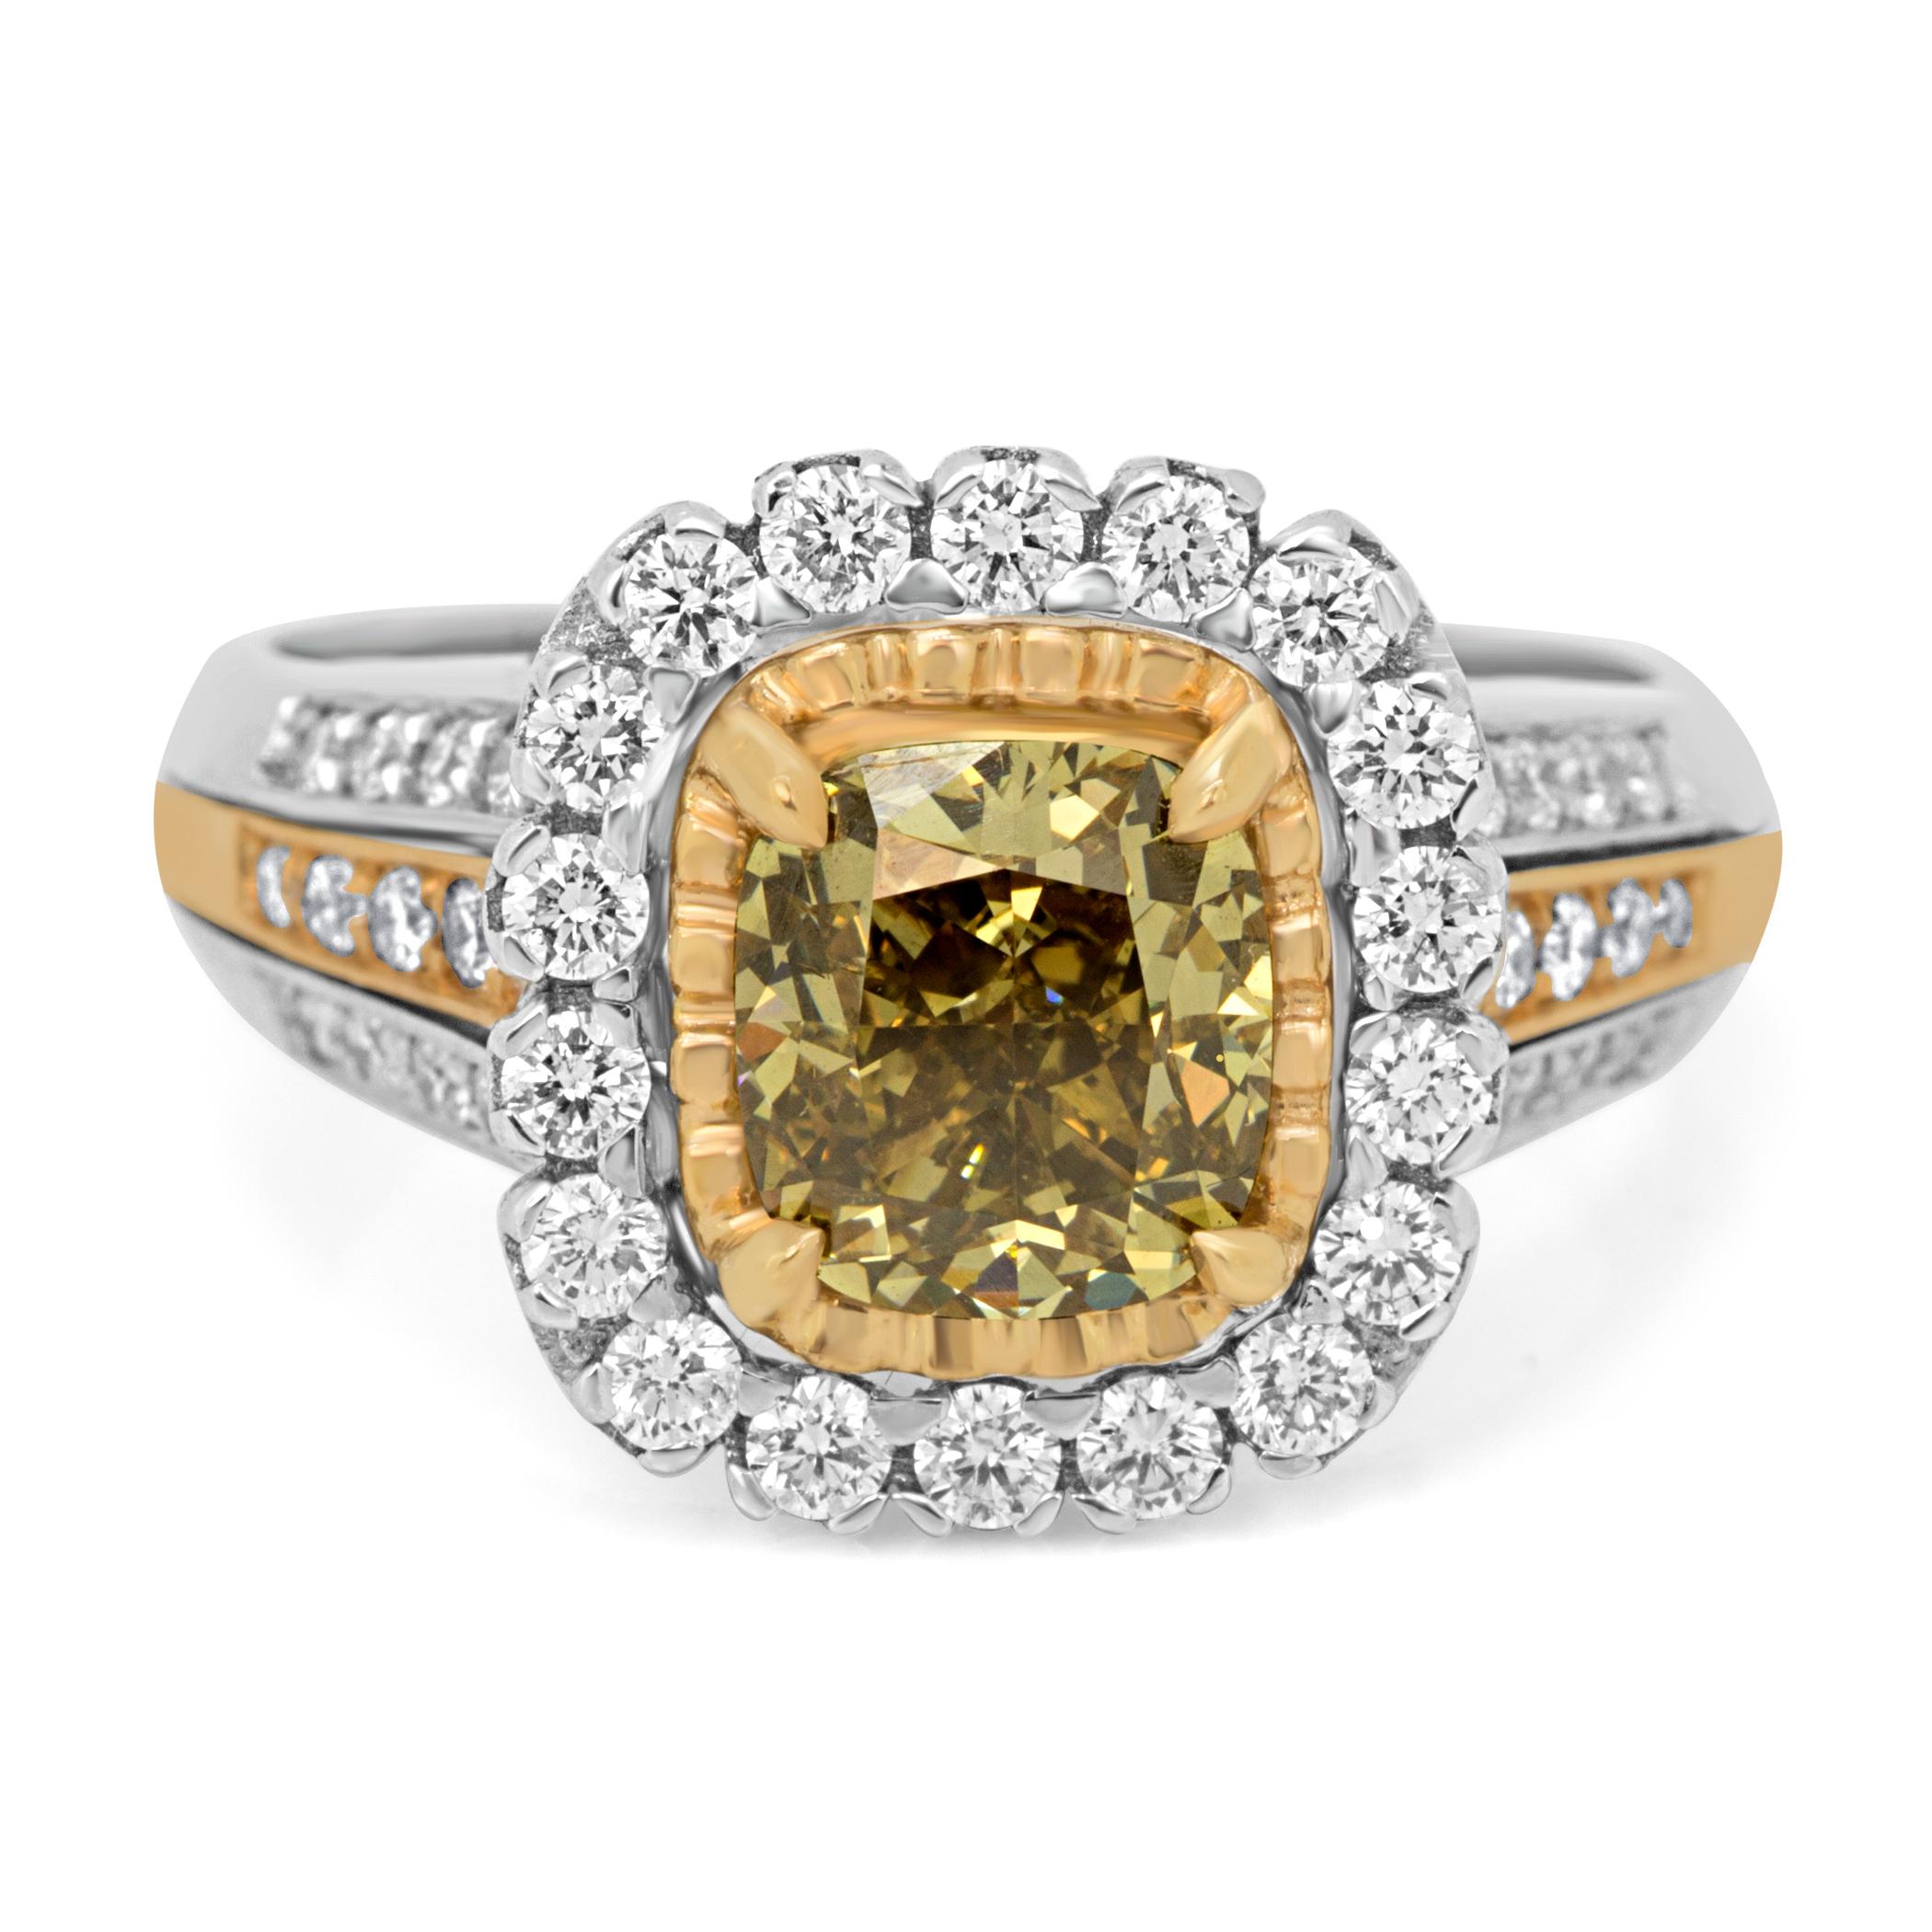 Certified Natural Fancy Dark Greenish Yellow Brown Diamond SI1 Cushion 1.71 Carat encircled in a Single Halo of White Colorless Diamond Round VS-SI clarity 0.73 Carat sent Stunning 18K WHite and Rose Gold Bridal Engagement Ring.

Style available in